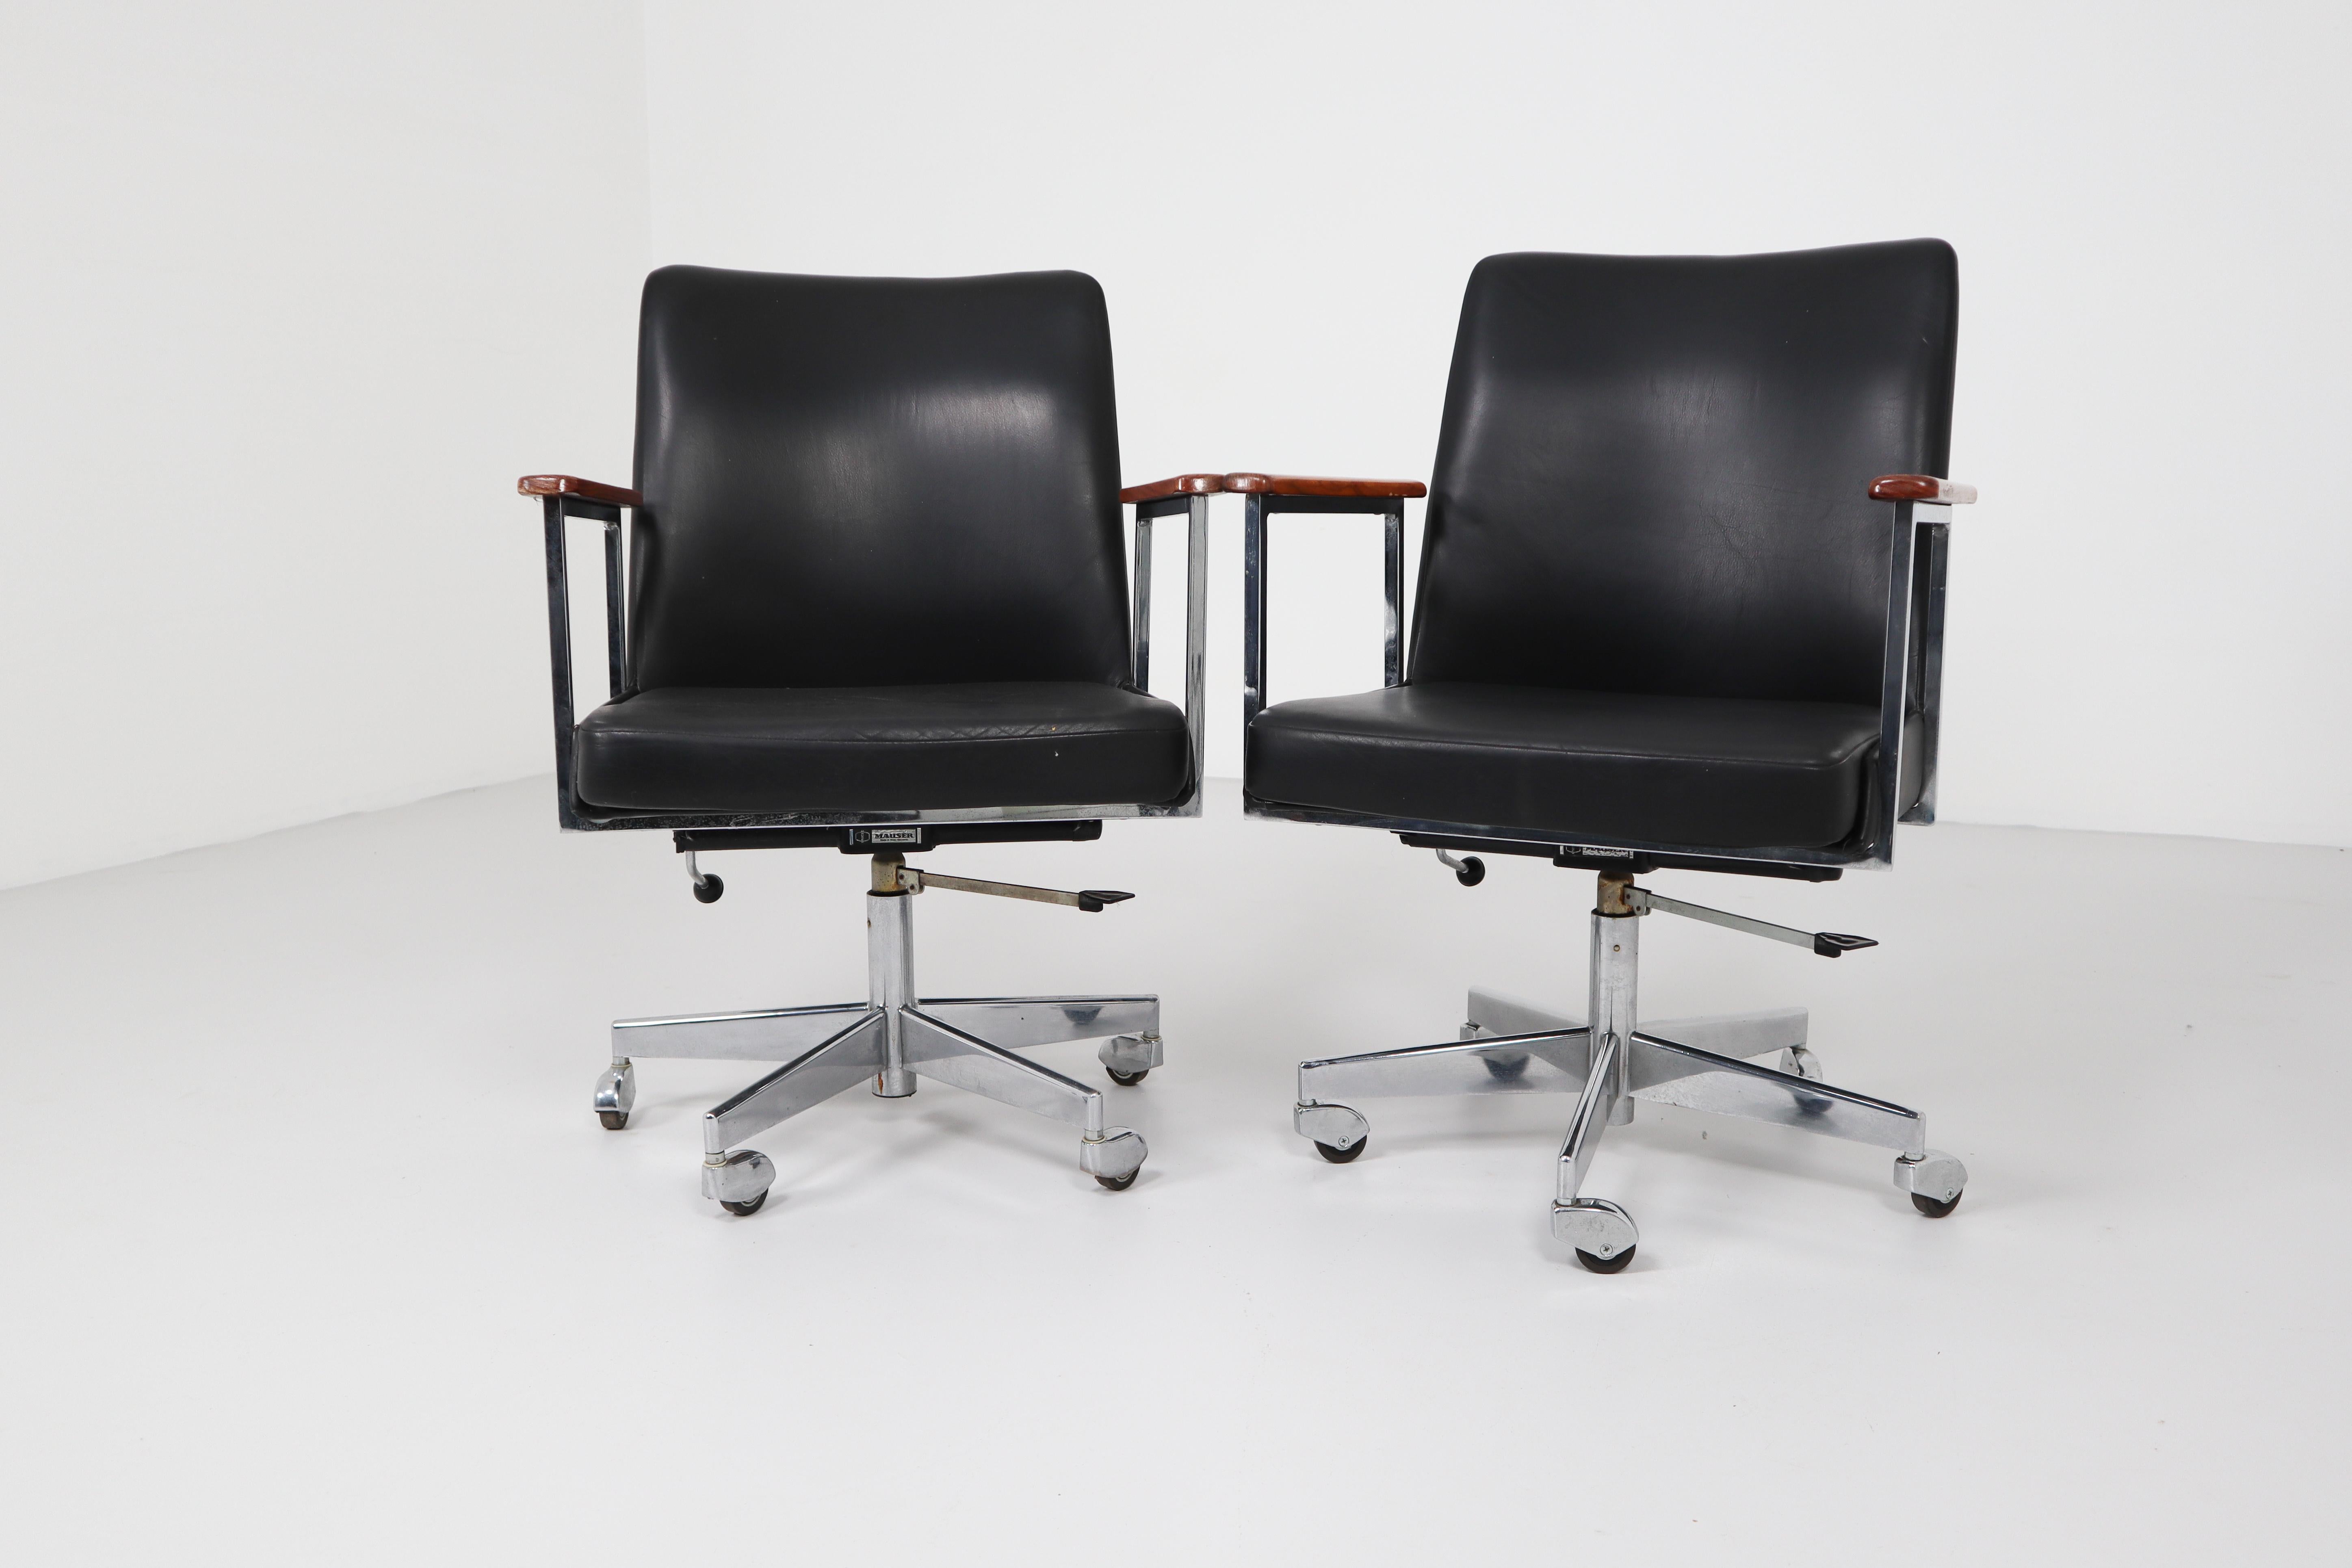 German Mid-Century Modern Black Leather Office Armchairs Manufactured by Mauser 1960s